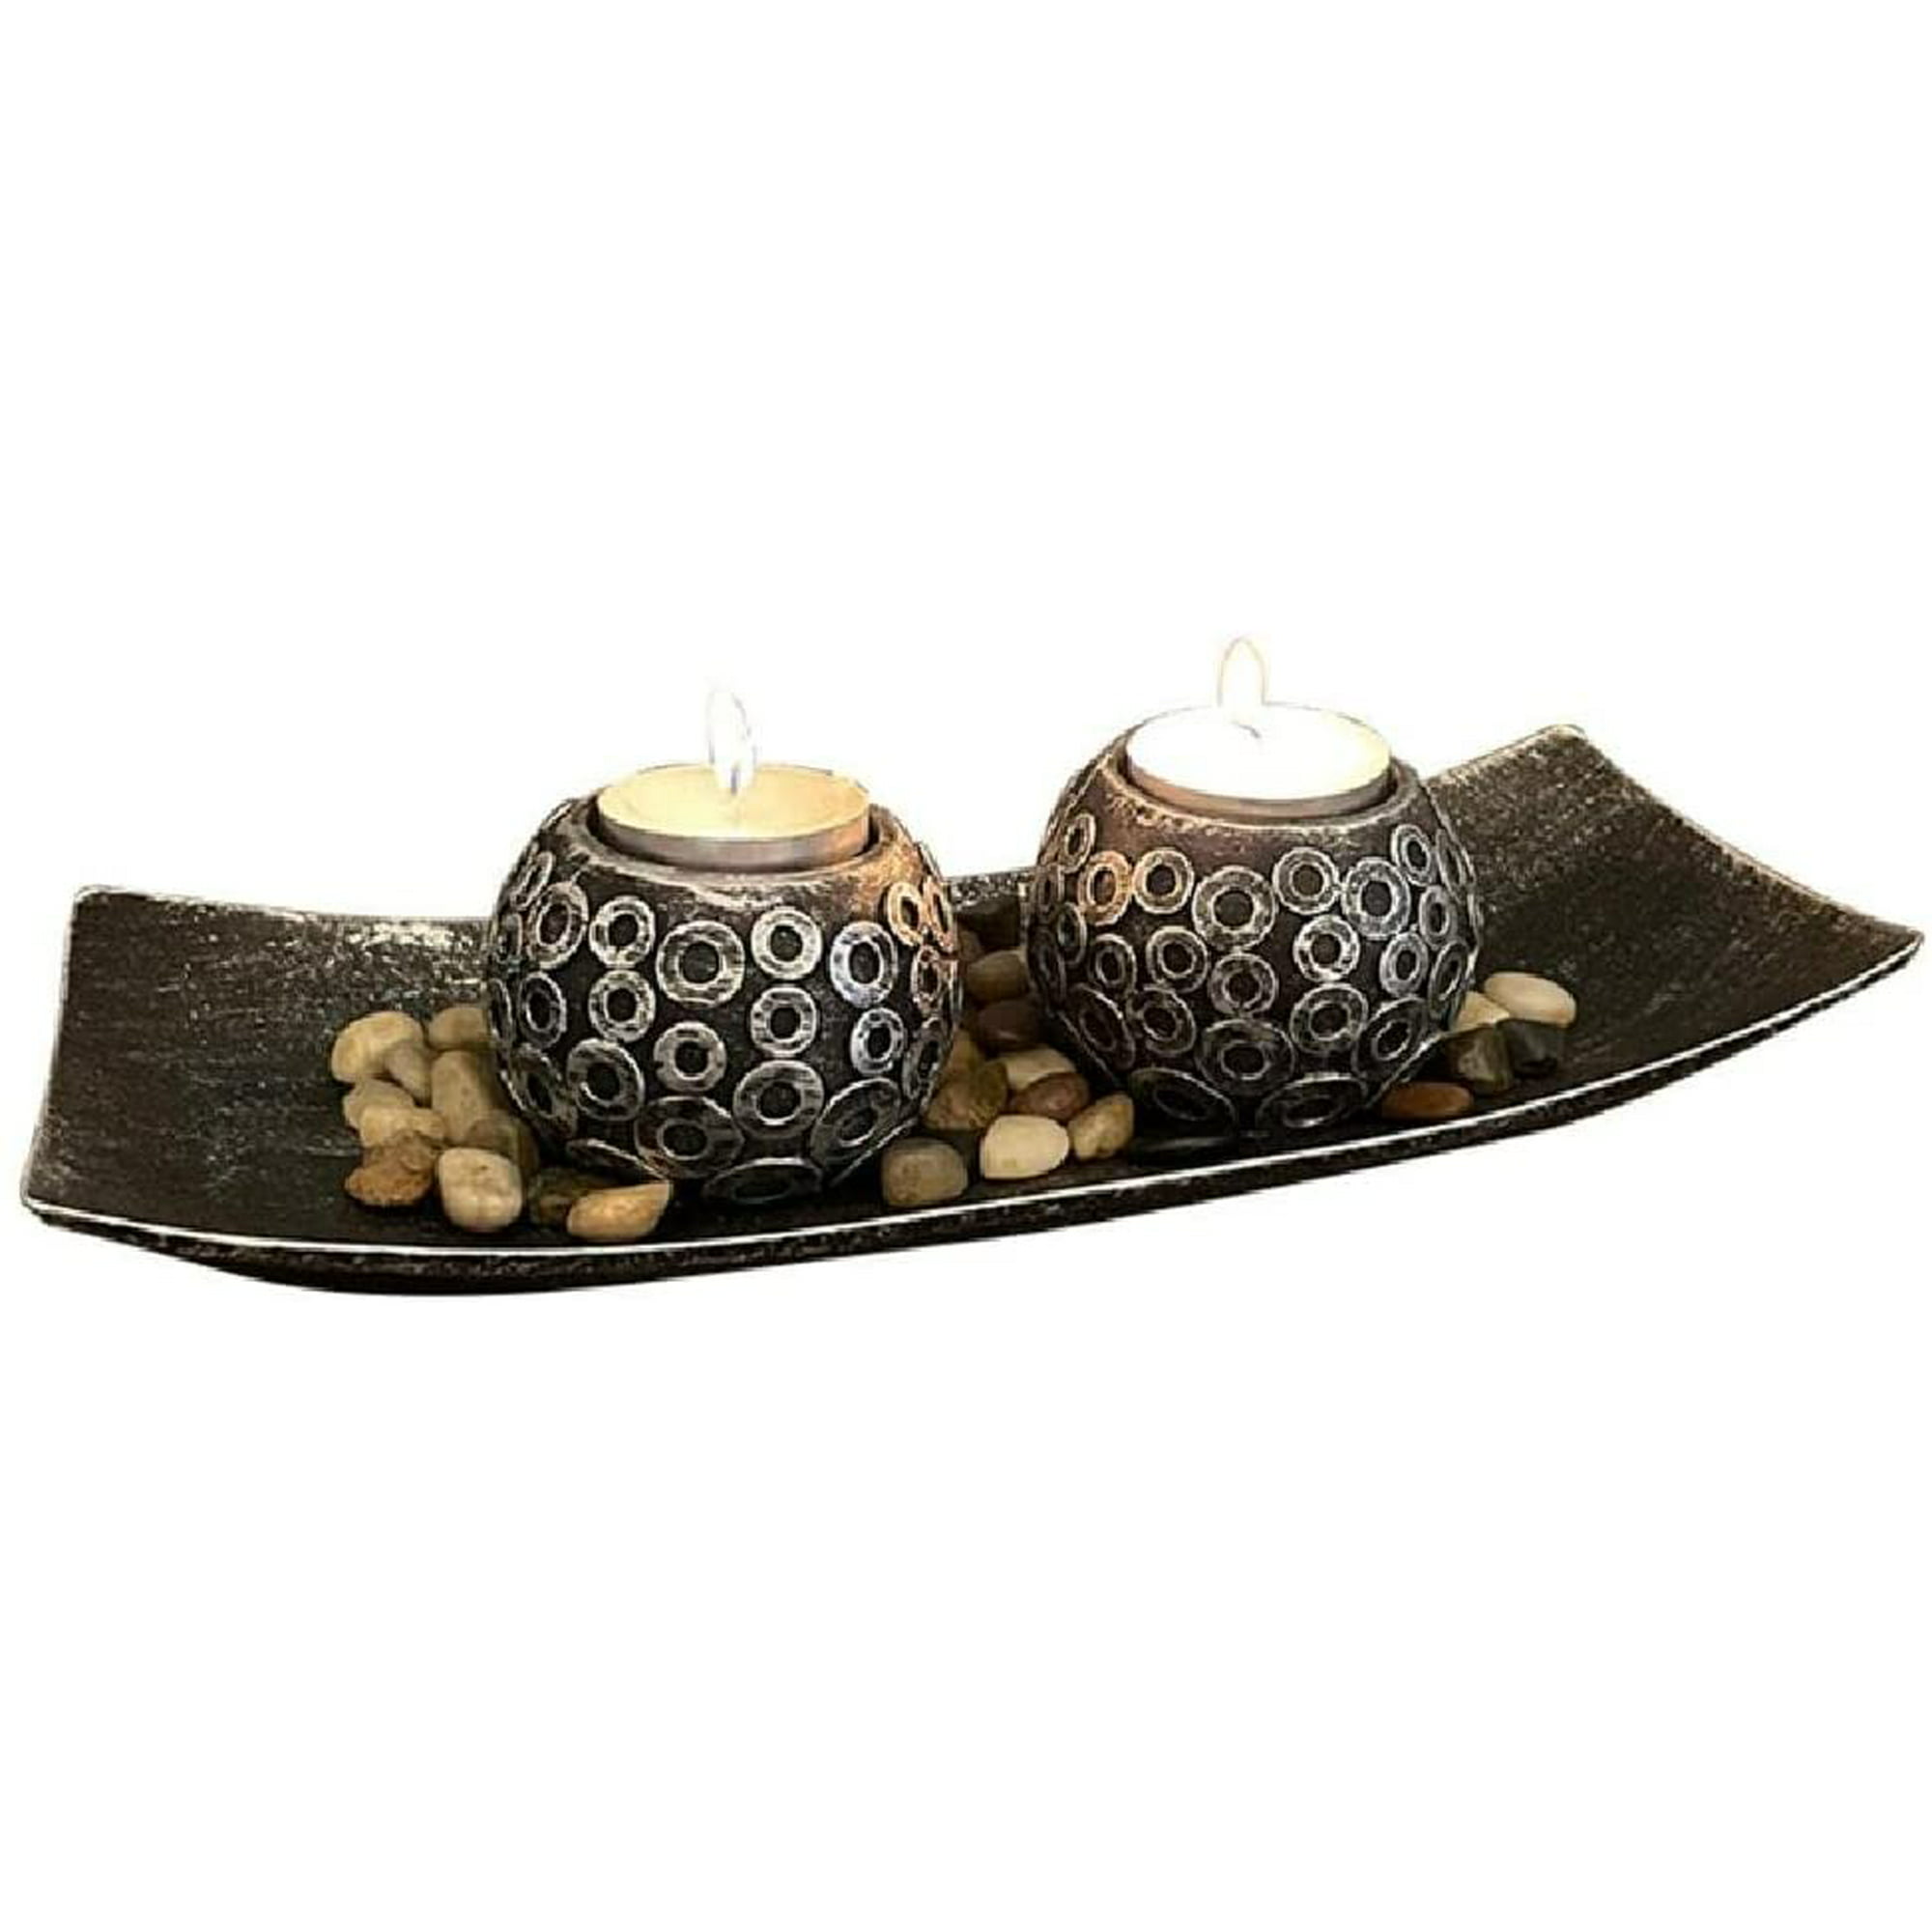 Fortunenine Rustic Wooden Resin Decorative Tea Light Candle Holder with  Tray Cups for Home Wedding Vintage Centerpieces Candlestick tealight Cups  for Candle Making | Walmart Canada